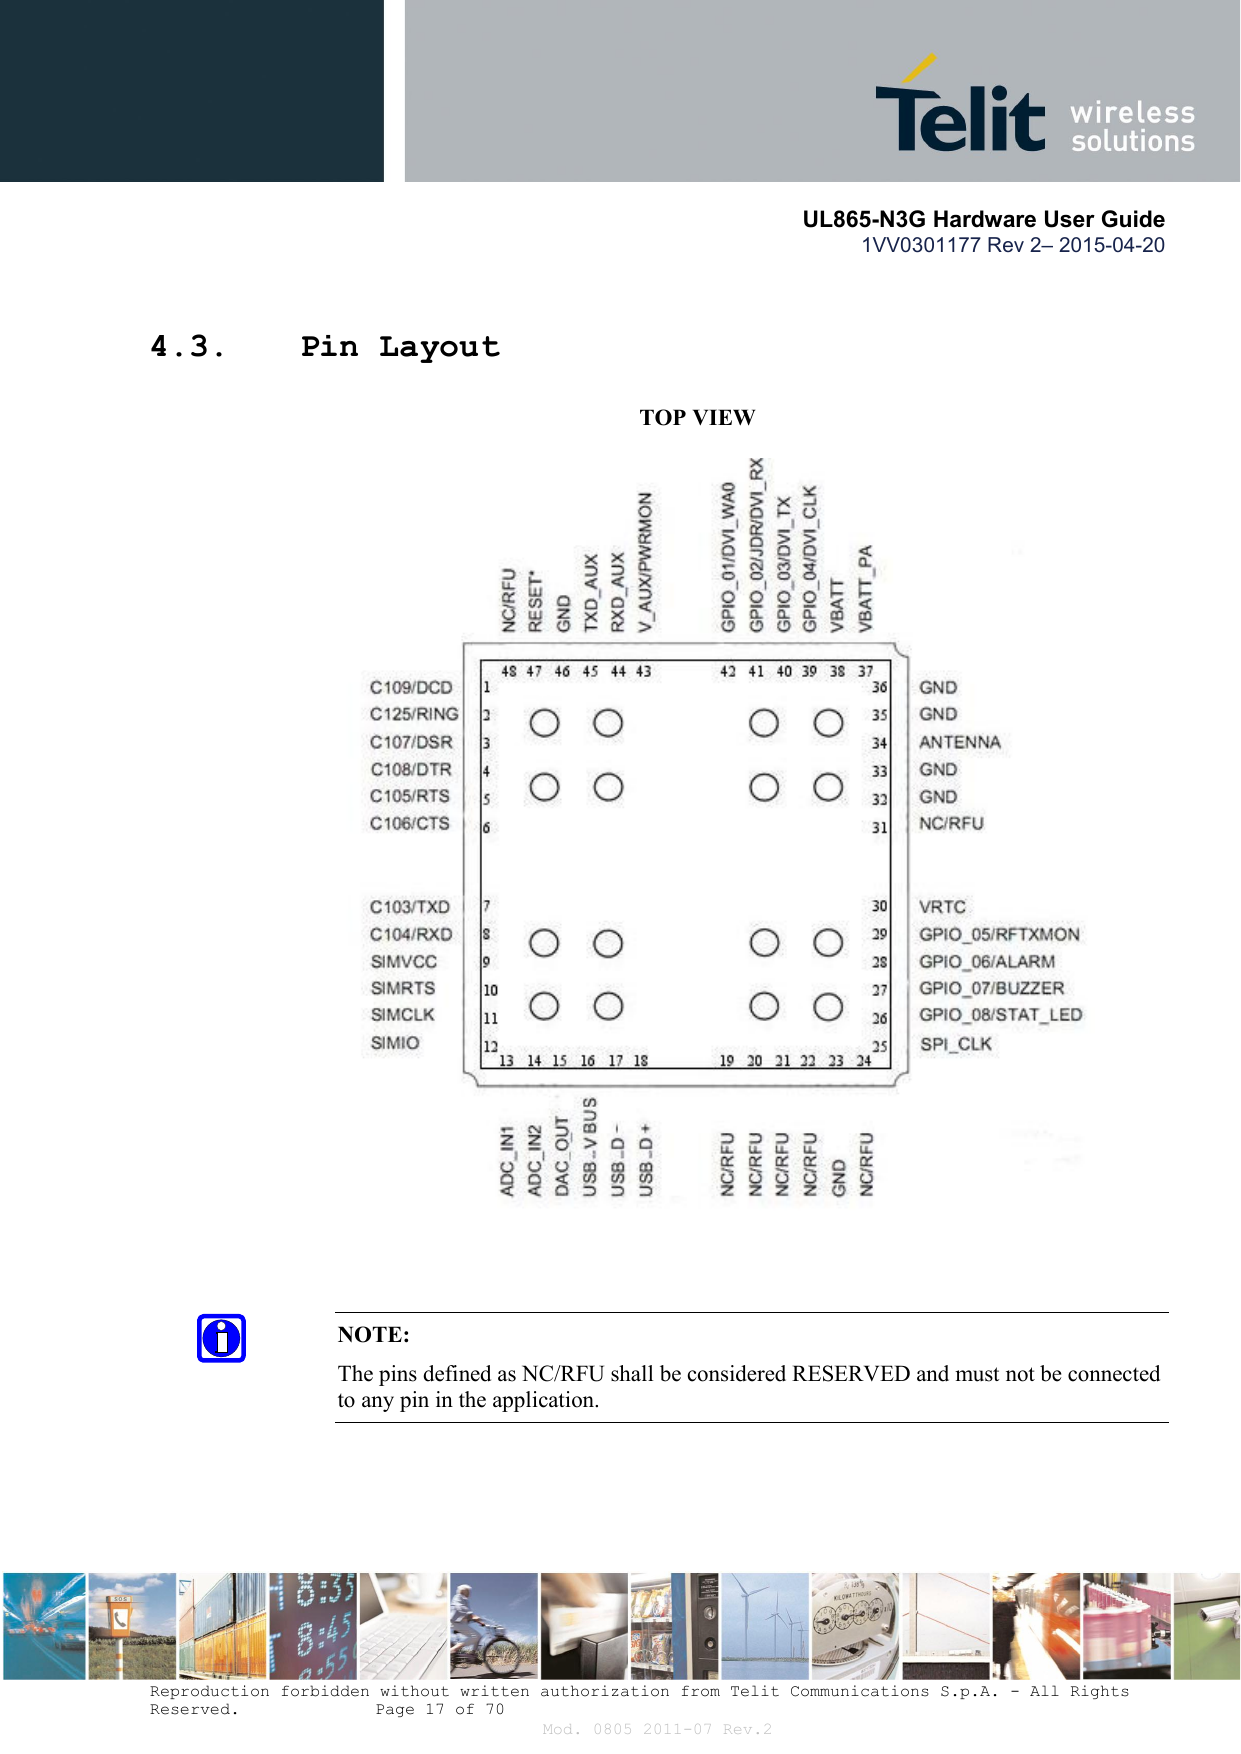       UL865-N3G Hardware User Guide 1VV0301177 Rev 2– 2015-04-20  Reproduction forbidden without written authorization from Telit Communications S.p.A. - All Rights Reserved.    Page 17 of 70 Mod. 0805 2011-07 Rev.2 4.3. Pin Layout           TOP VIEW                                  NOTE: The pins defined as NC/RFU shall be considered RESERVED and must not be connected to any pin in the application. 